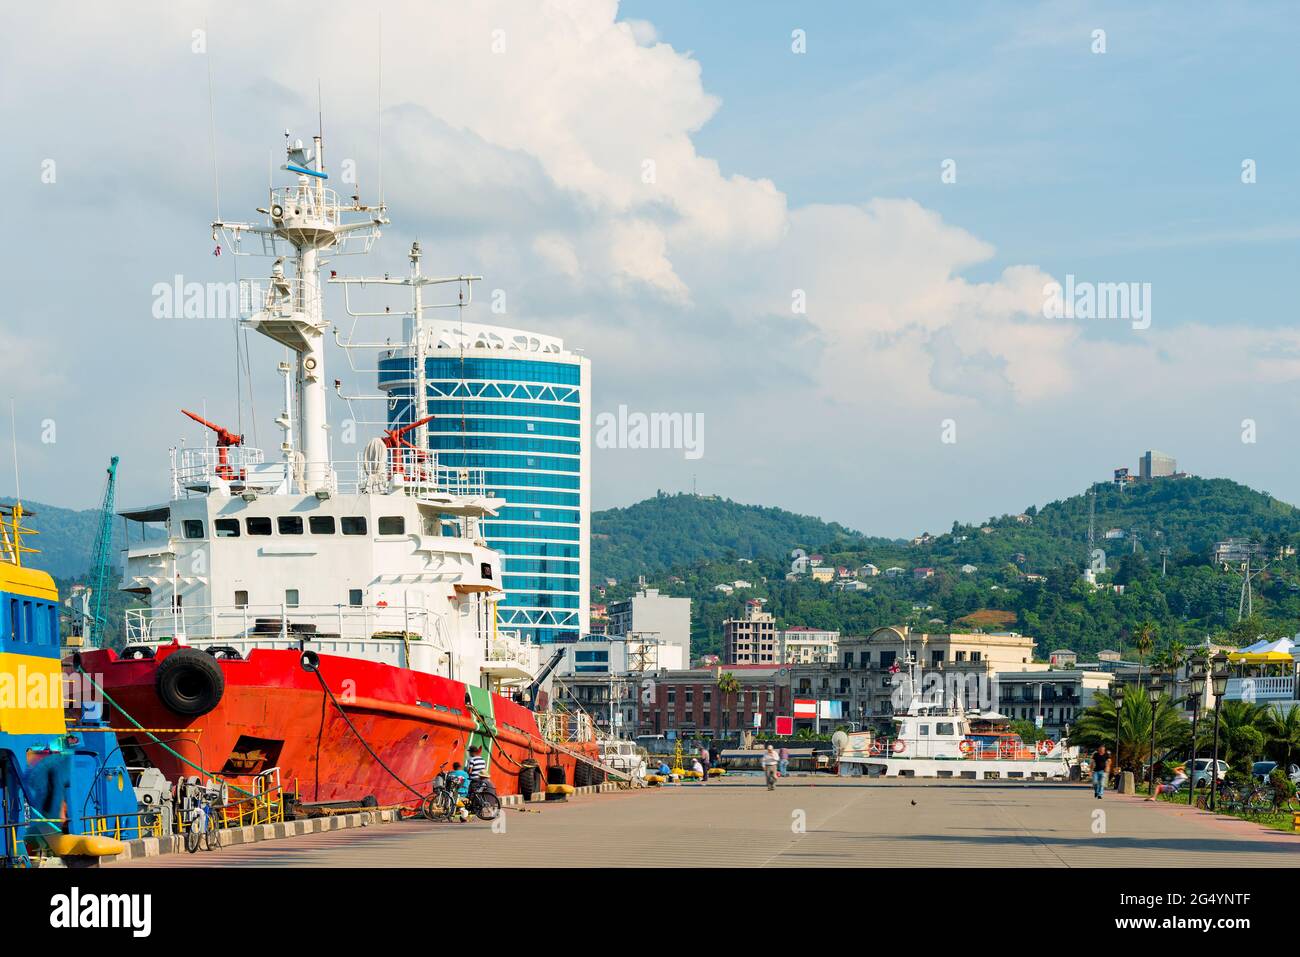 Cargo ship moored in the port of the city against the backdrop of the mountains Stock Photo